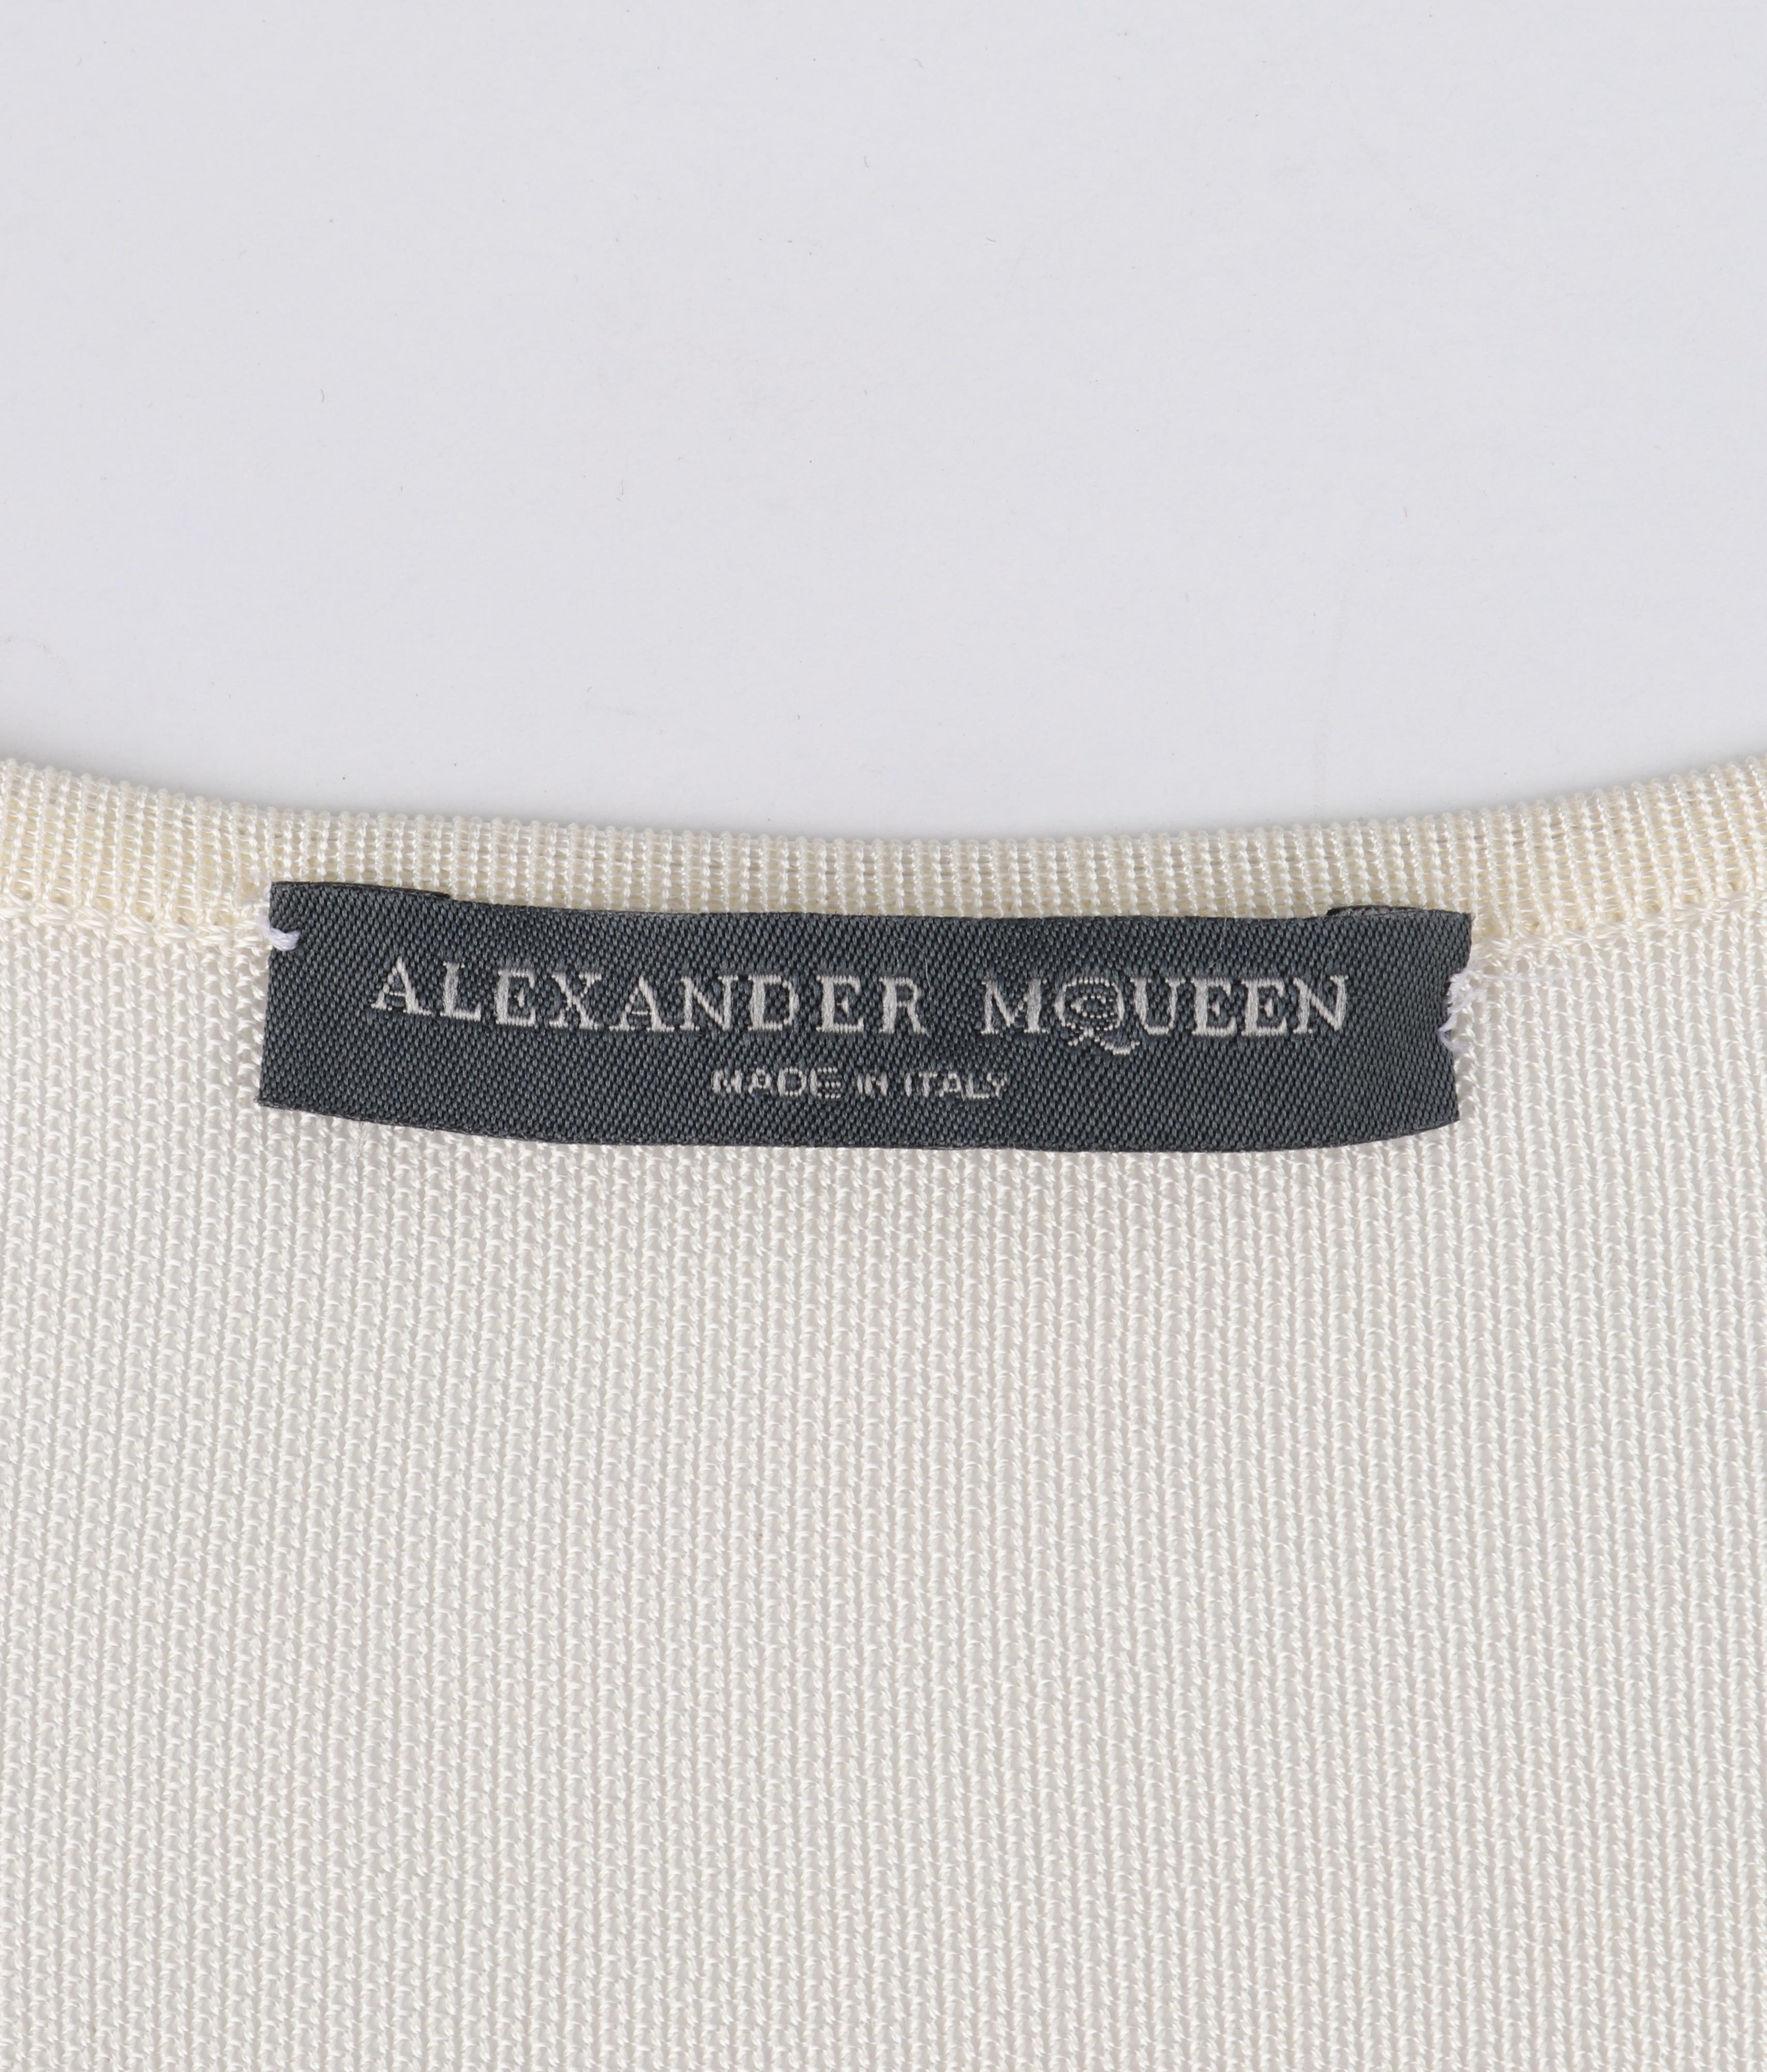 ALEXANDER McQUEEN c.2007 Ivory Stretch Knit Semi-Sheer Sleeveless Bandage Top For Sale 2